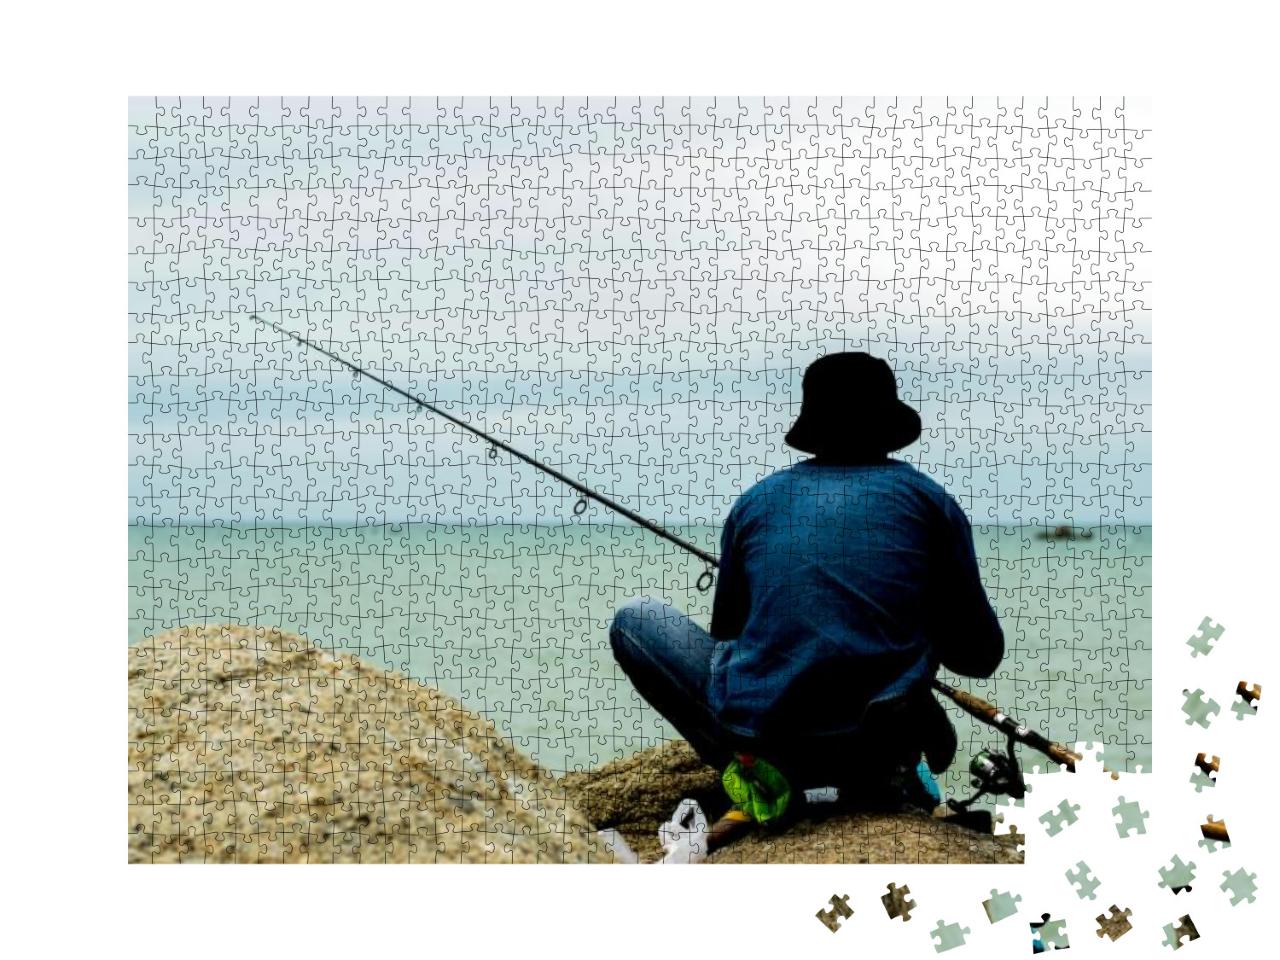 Man Fishing on the Beach, Fishing, Hunting for Fish. Fish... Jigsaw Puzzle with 1000 pieces